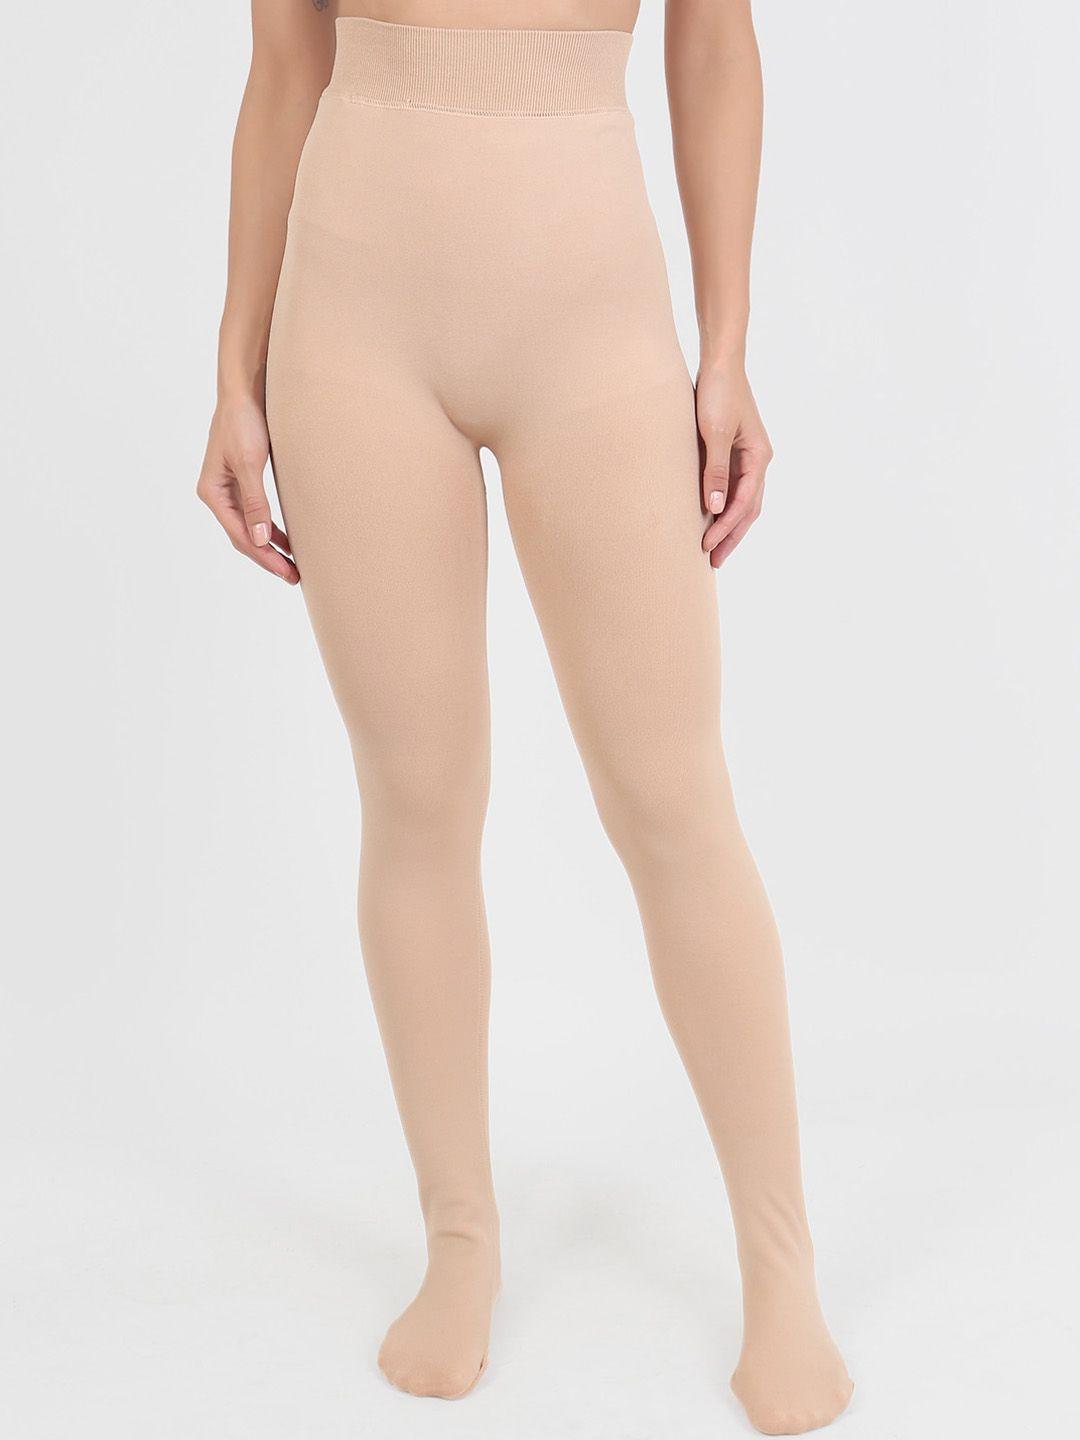 lebami women beige solid thermal stockings with fur inside